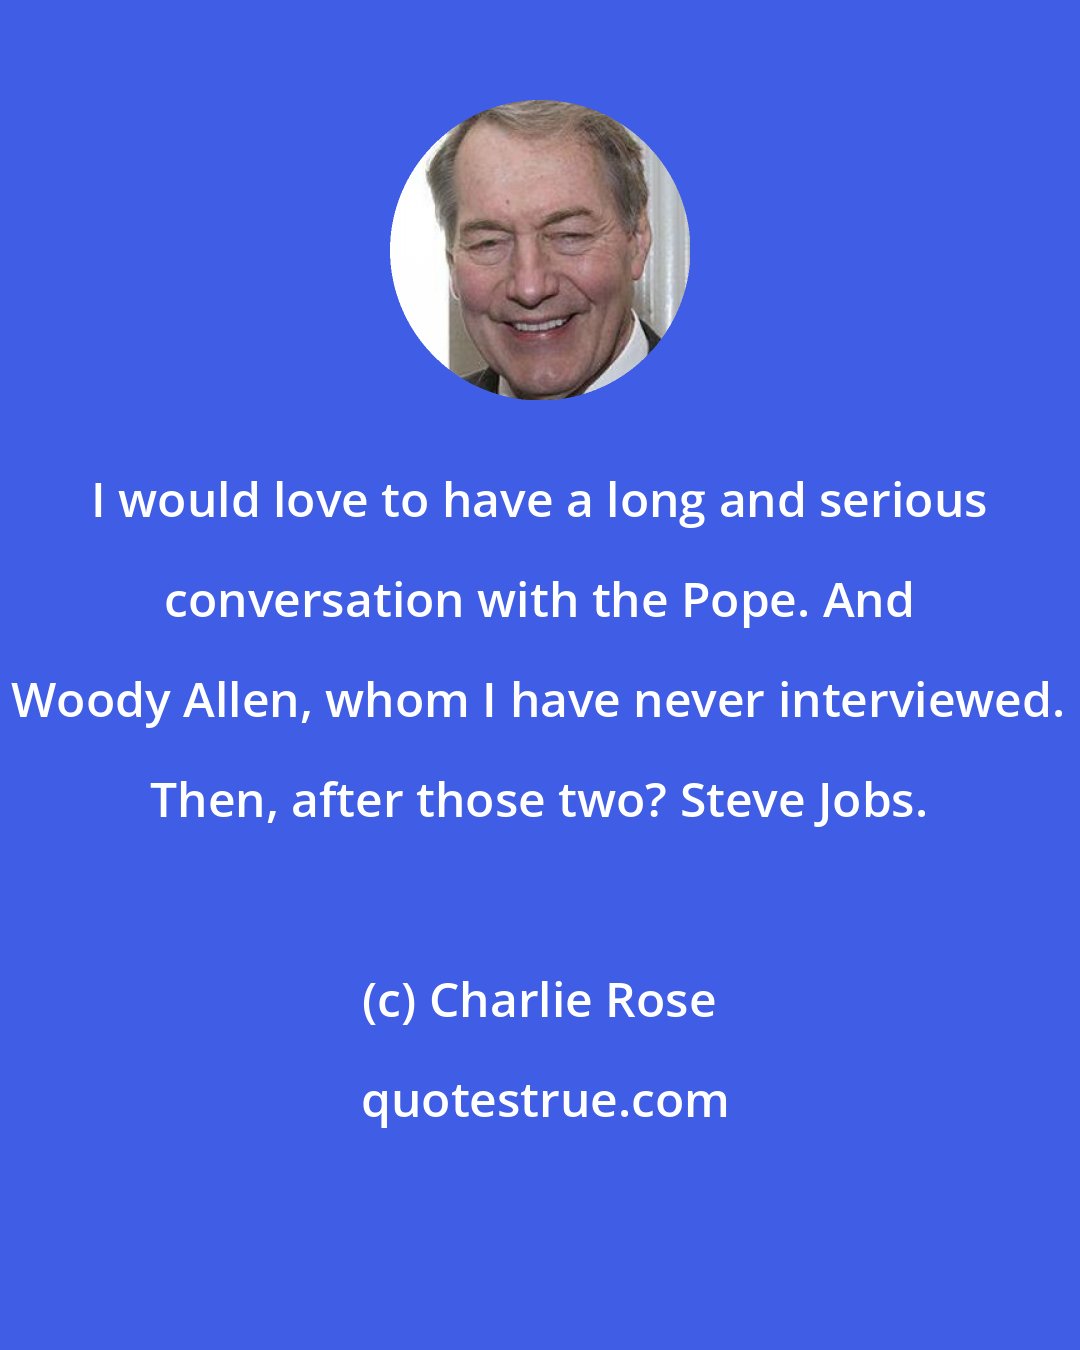 Charlie Rose: I would love to have a long and serious conversation with the Pope. And Woody Allen, whom I have never interviewed. Then, after those two? Steve Jobs.